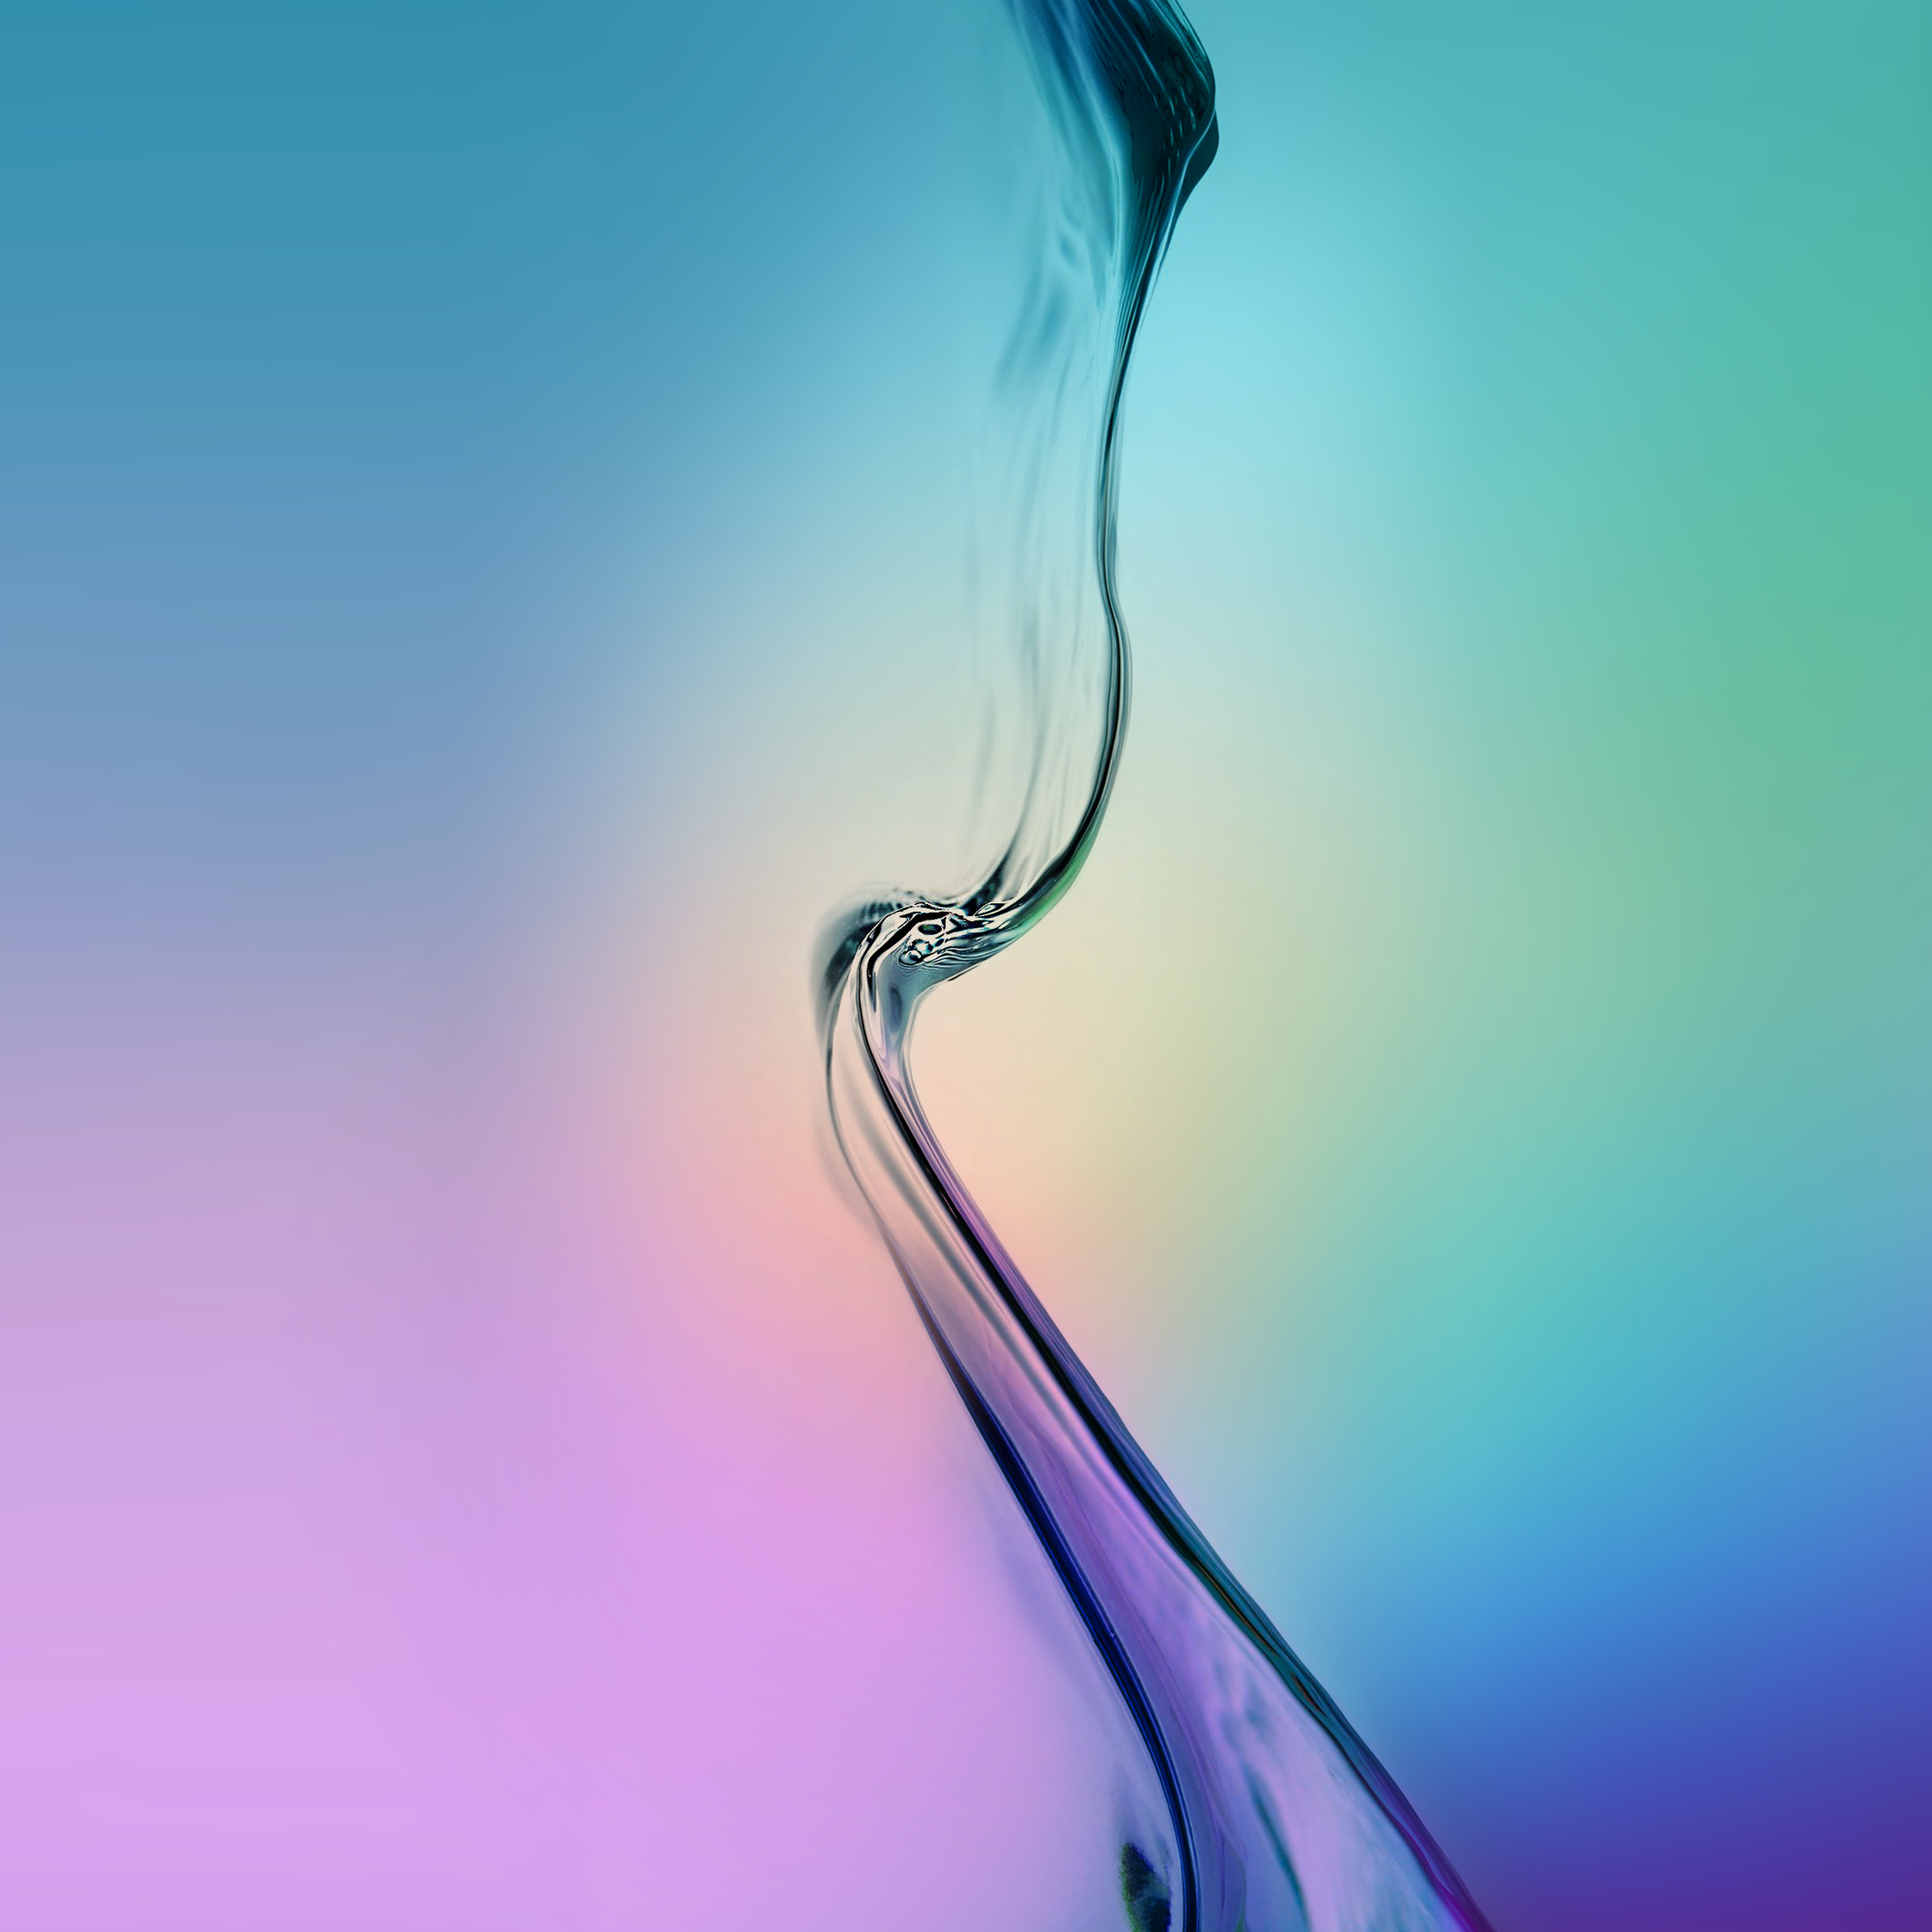 A gift from SamMobile: Galaxy S6 and Galaxy S6 Edge default wallpaper!